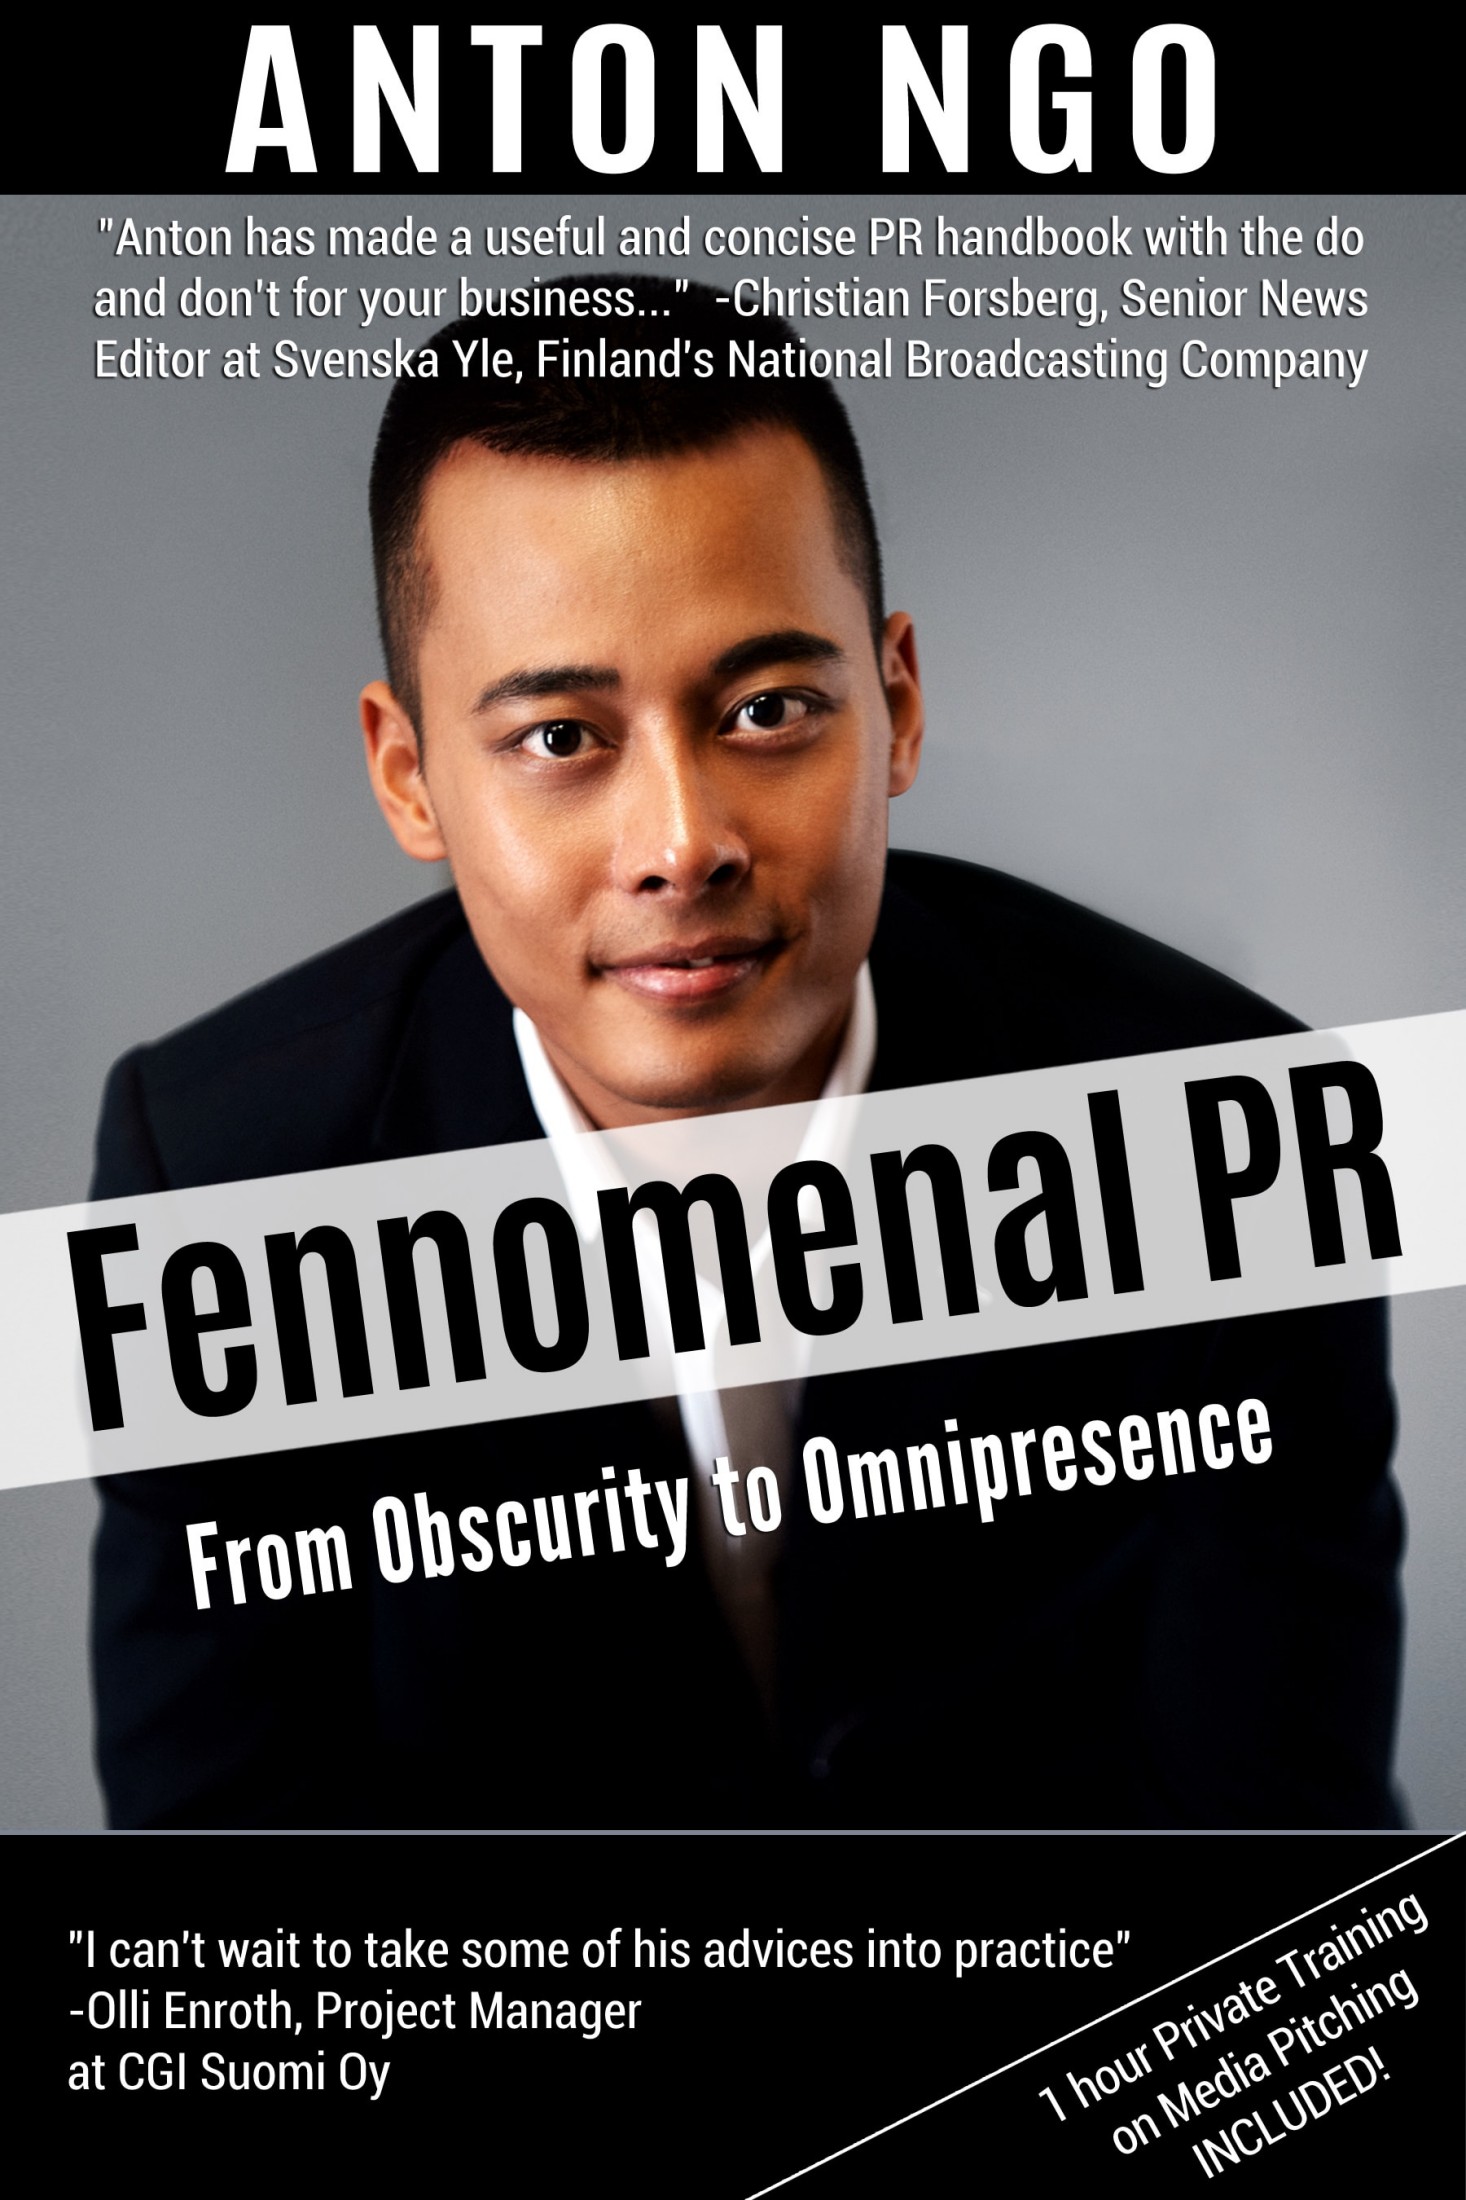 FREE: Fennomenal PR: From Obscurity to Omnipresence by Anton Ngo